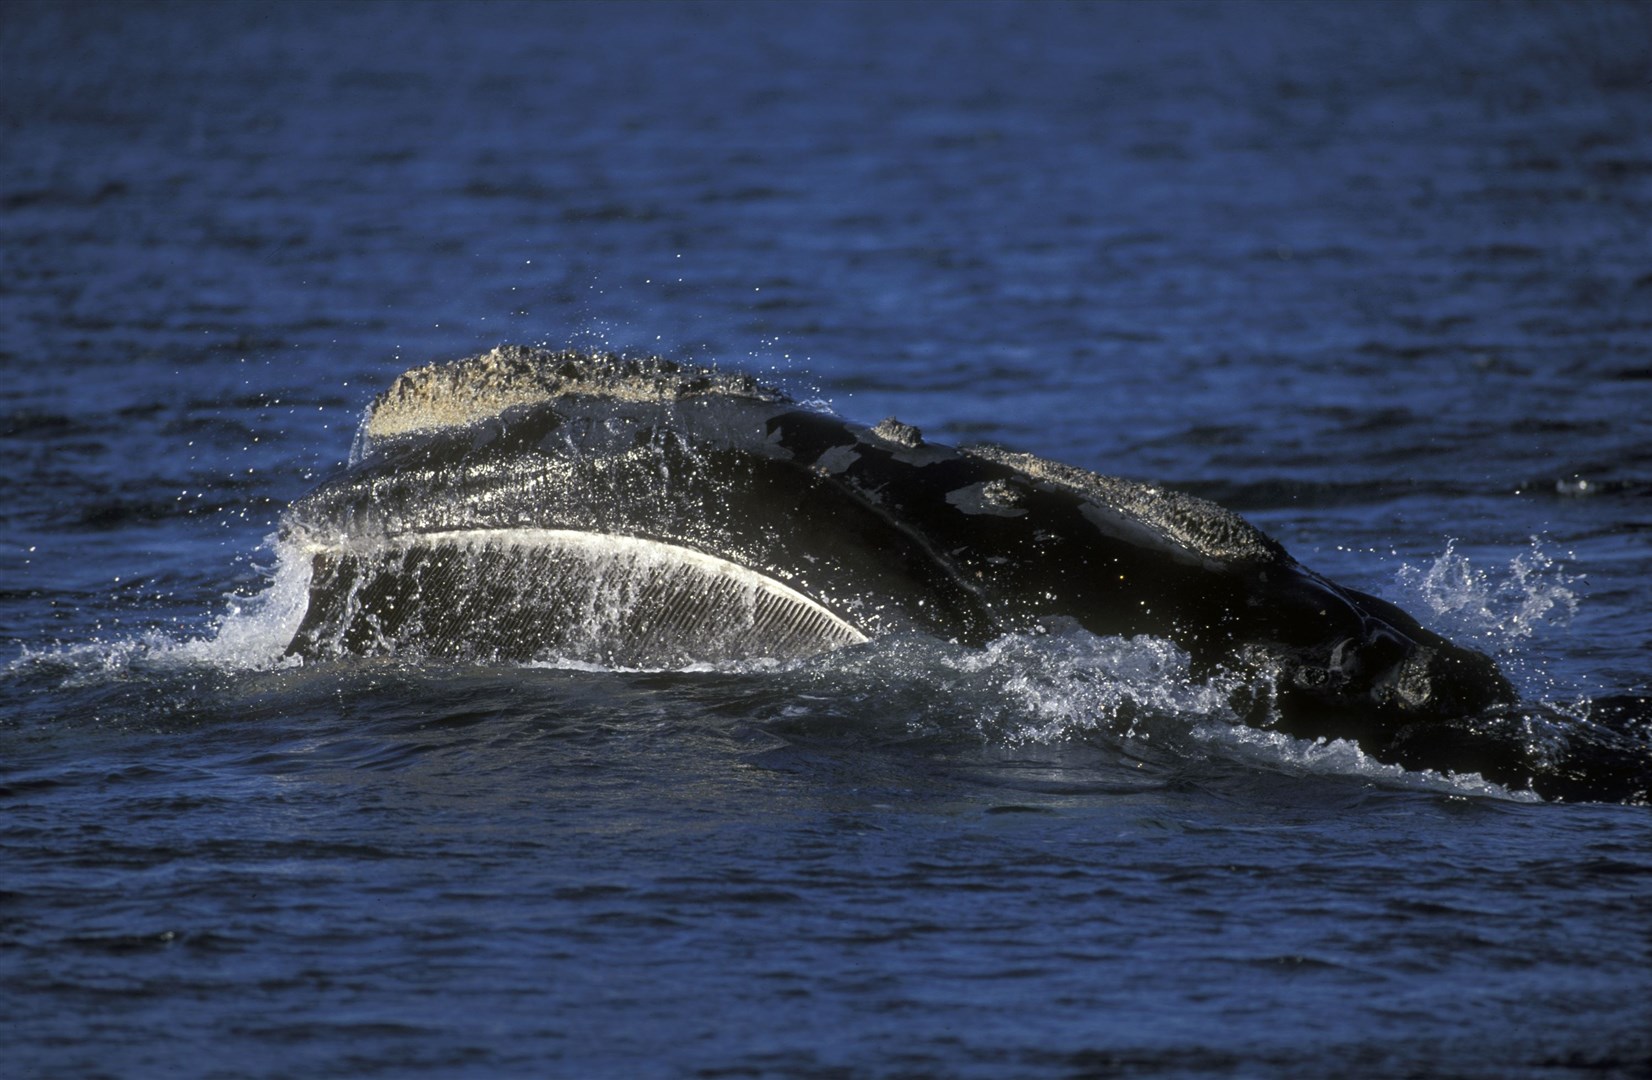 A North Atlantic right whale, a rare species spotted yesterday which people are being asked to look out for.